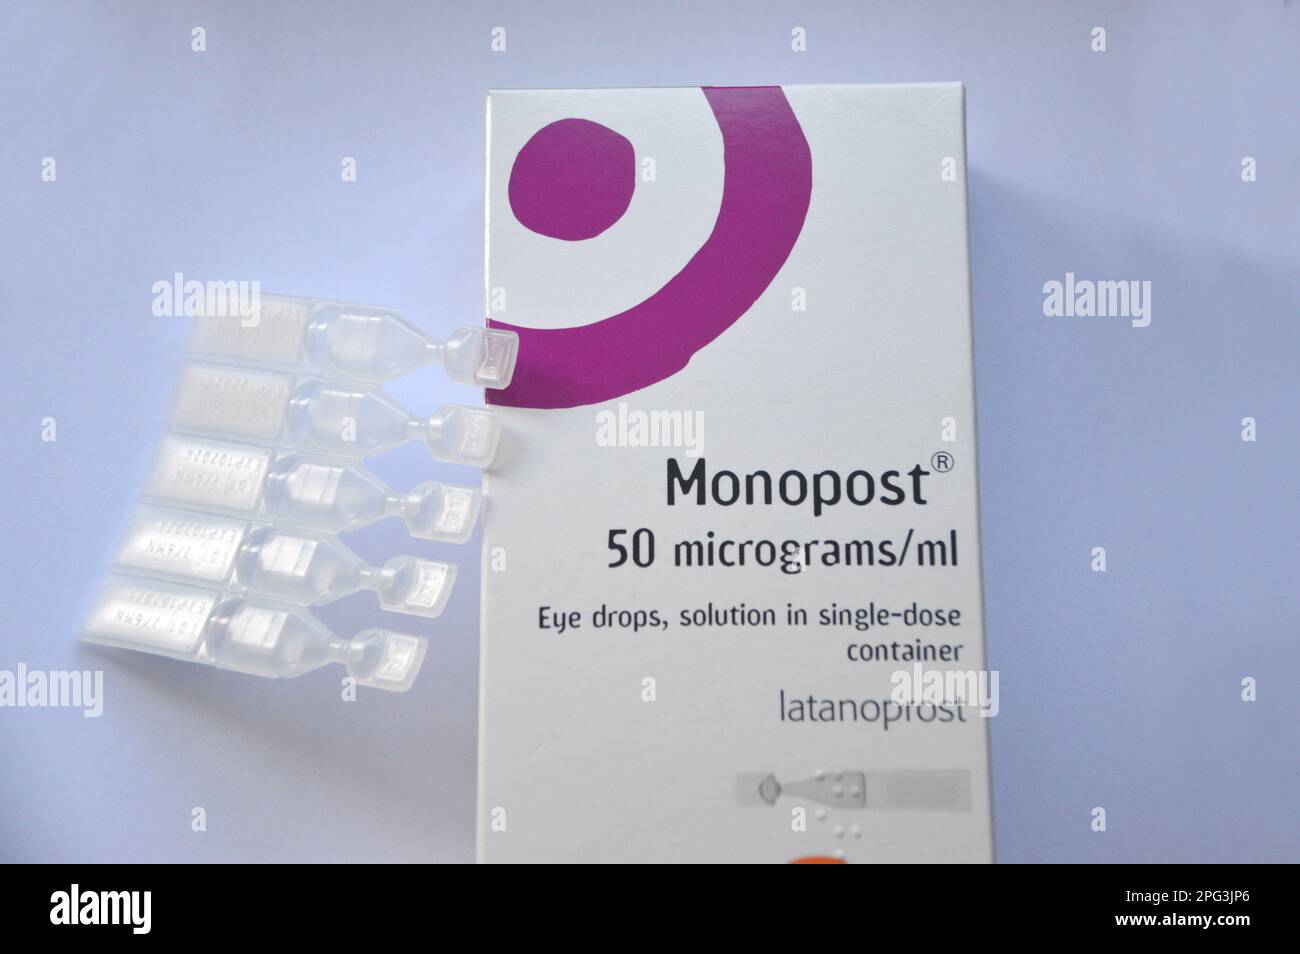 A Box of Monopost (Latanoprost) 50 mcg/ml Eye Drop Solution in single-dose Containers by Thea to Treat Open Angle Glaucoma and Ocular Hypertension. Stock Photo